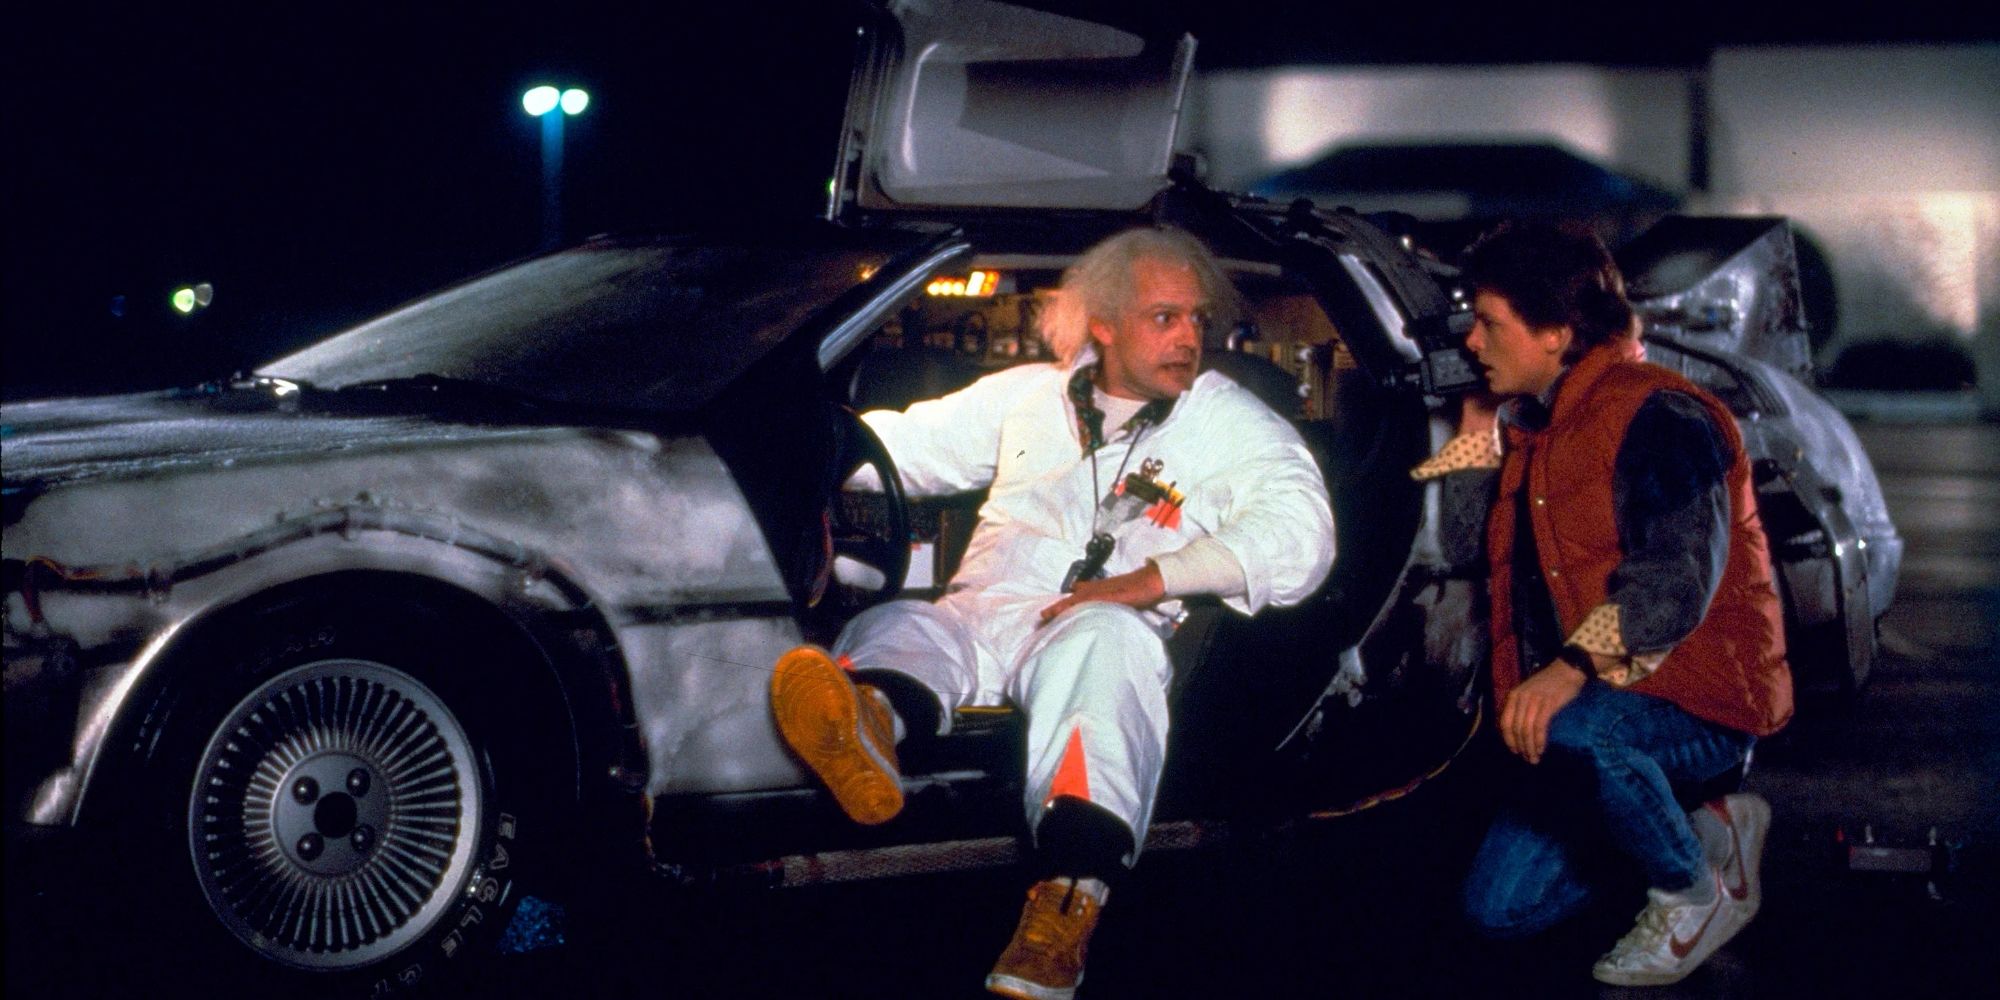 Doc and Marty talking beside the Delorean time machine in 'Back to the Future'